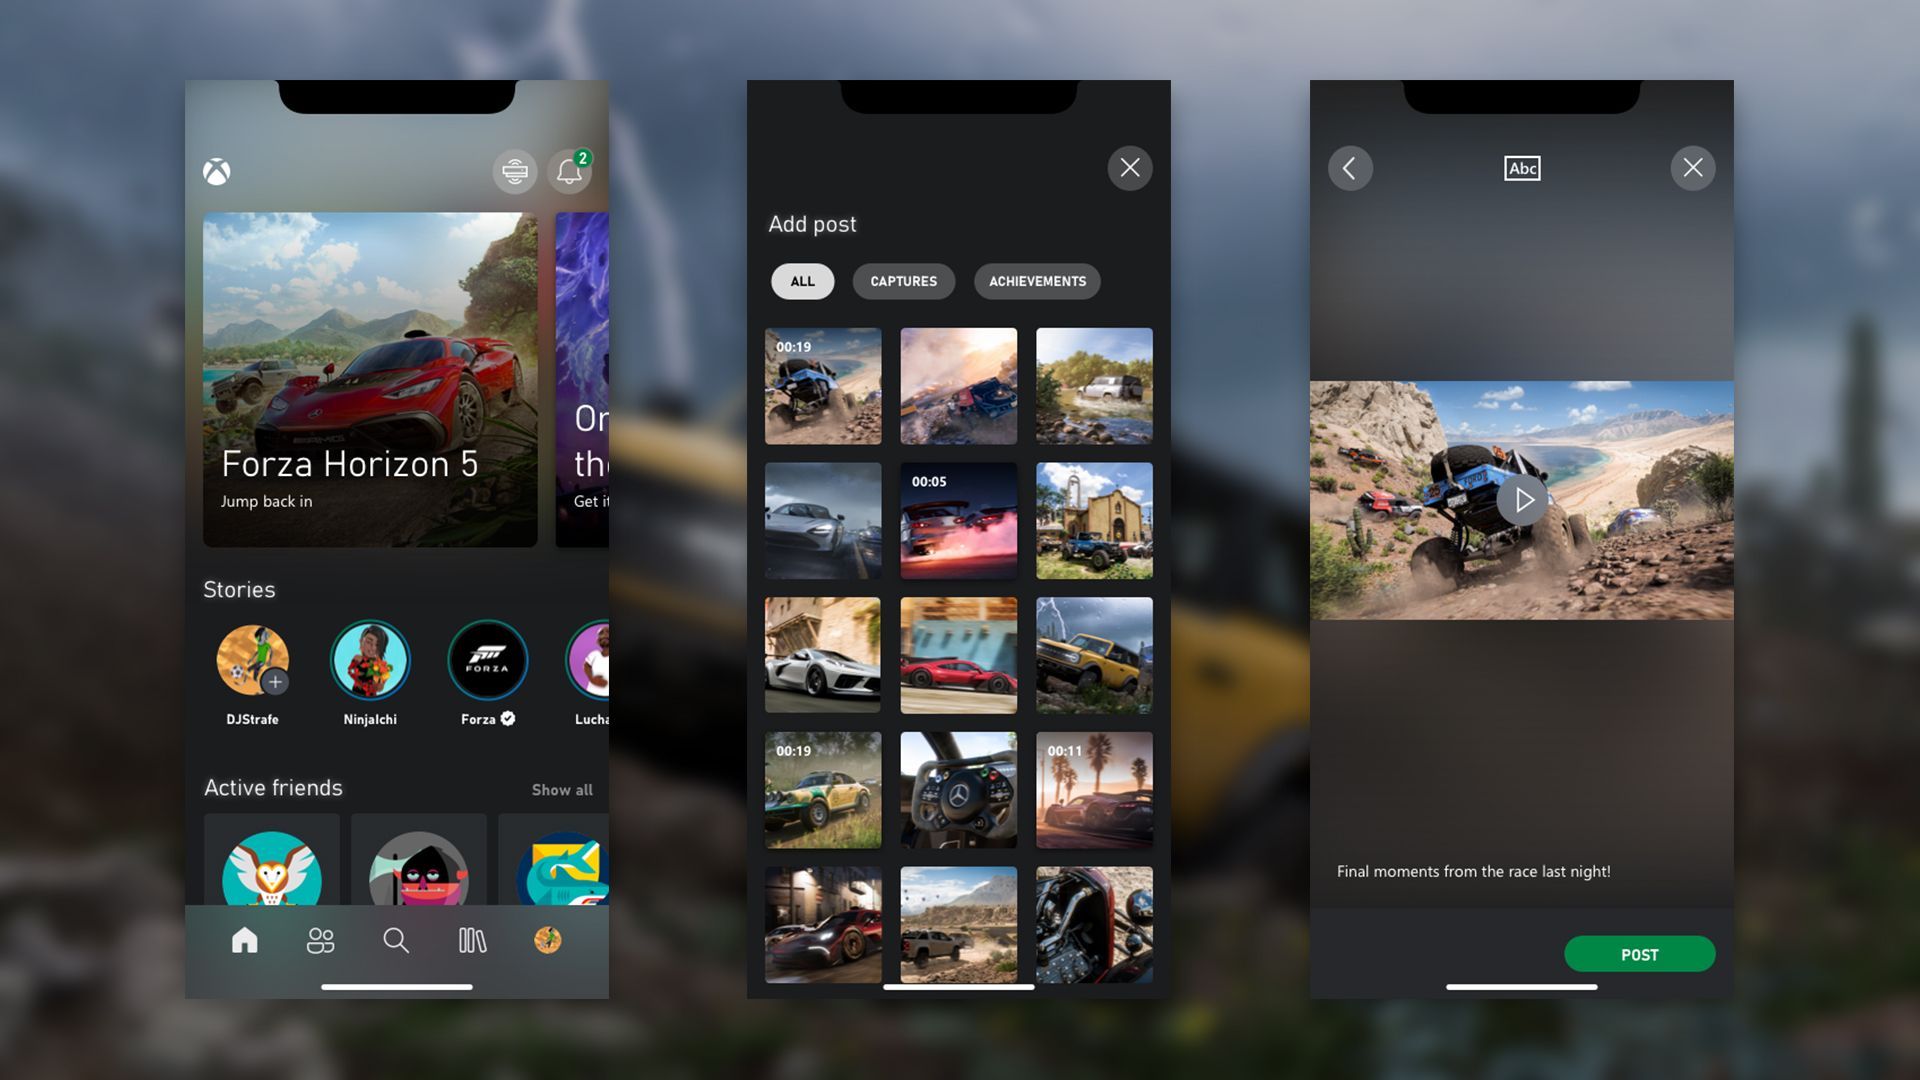 Xbox App May 2022 Update To Revamp Activity Feed With Stories for All Users Soon